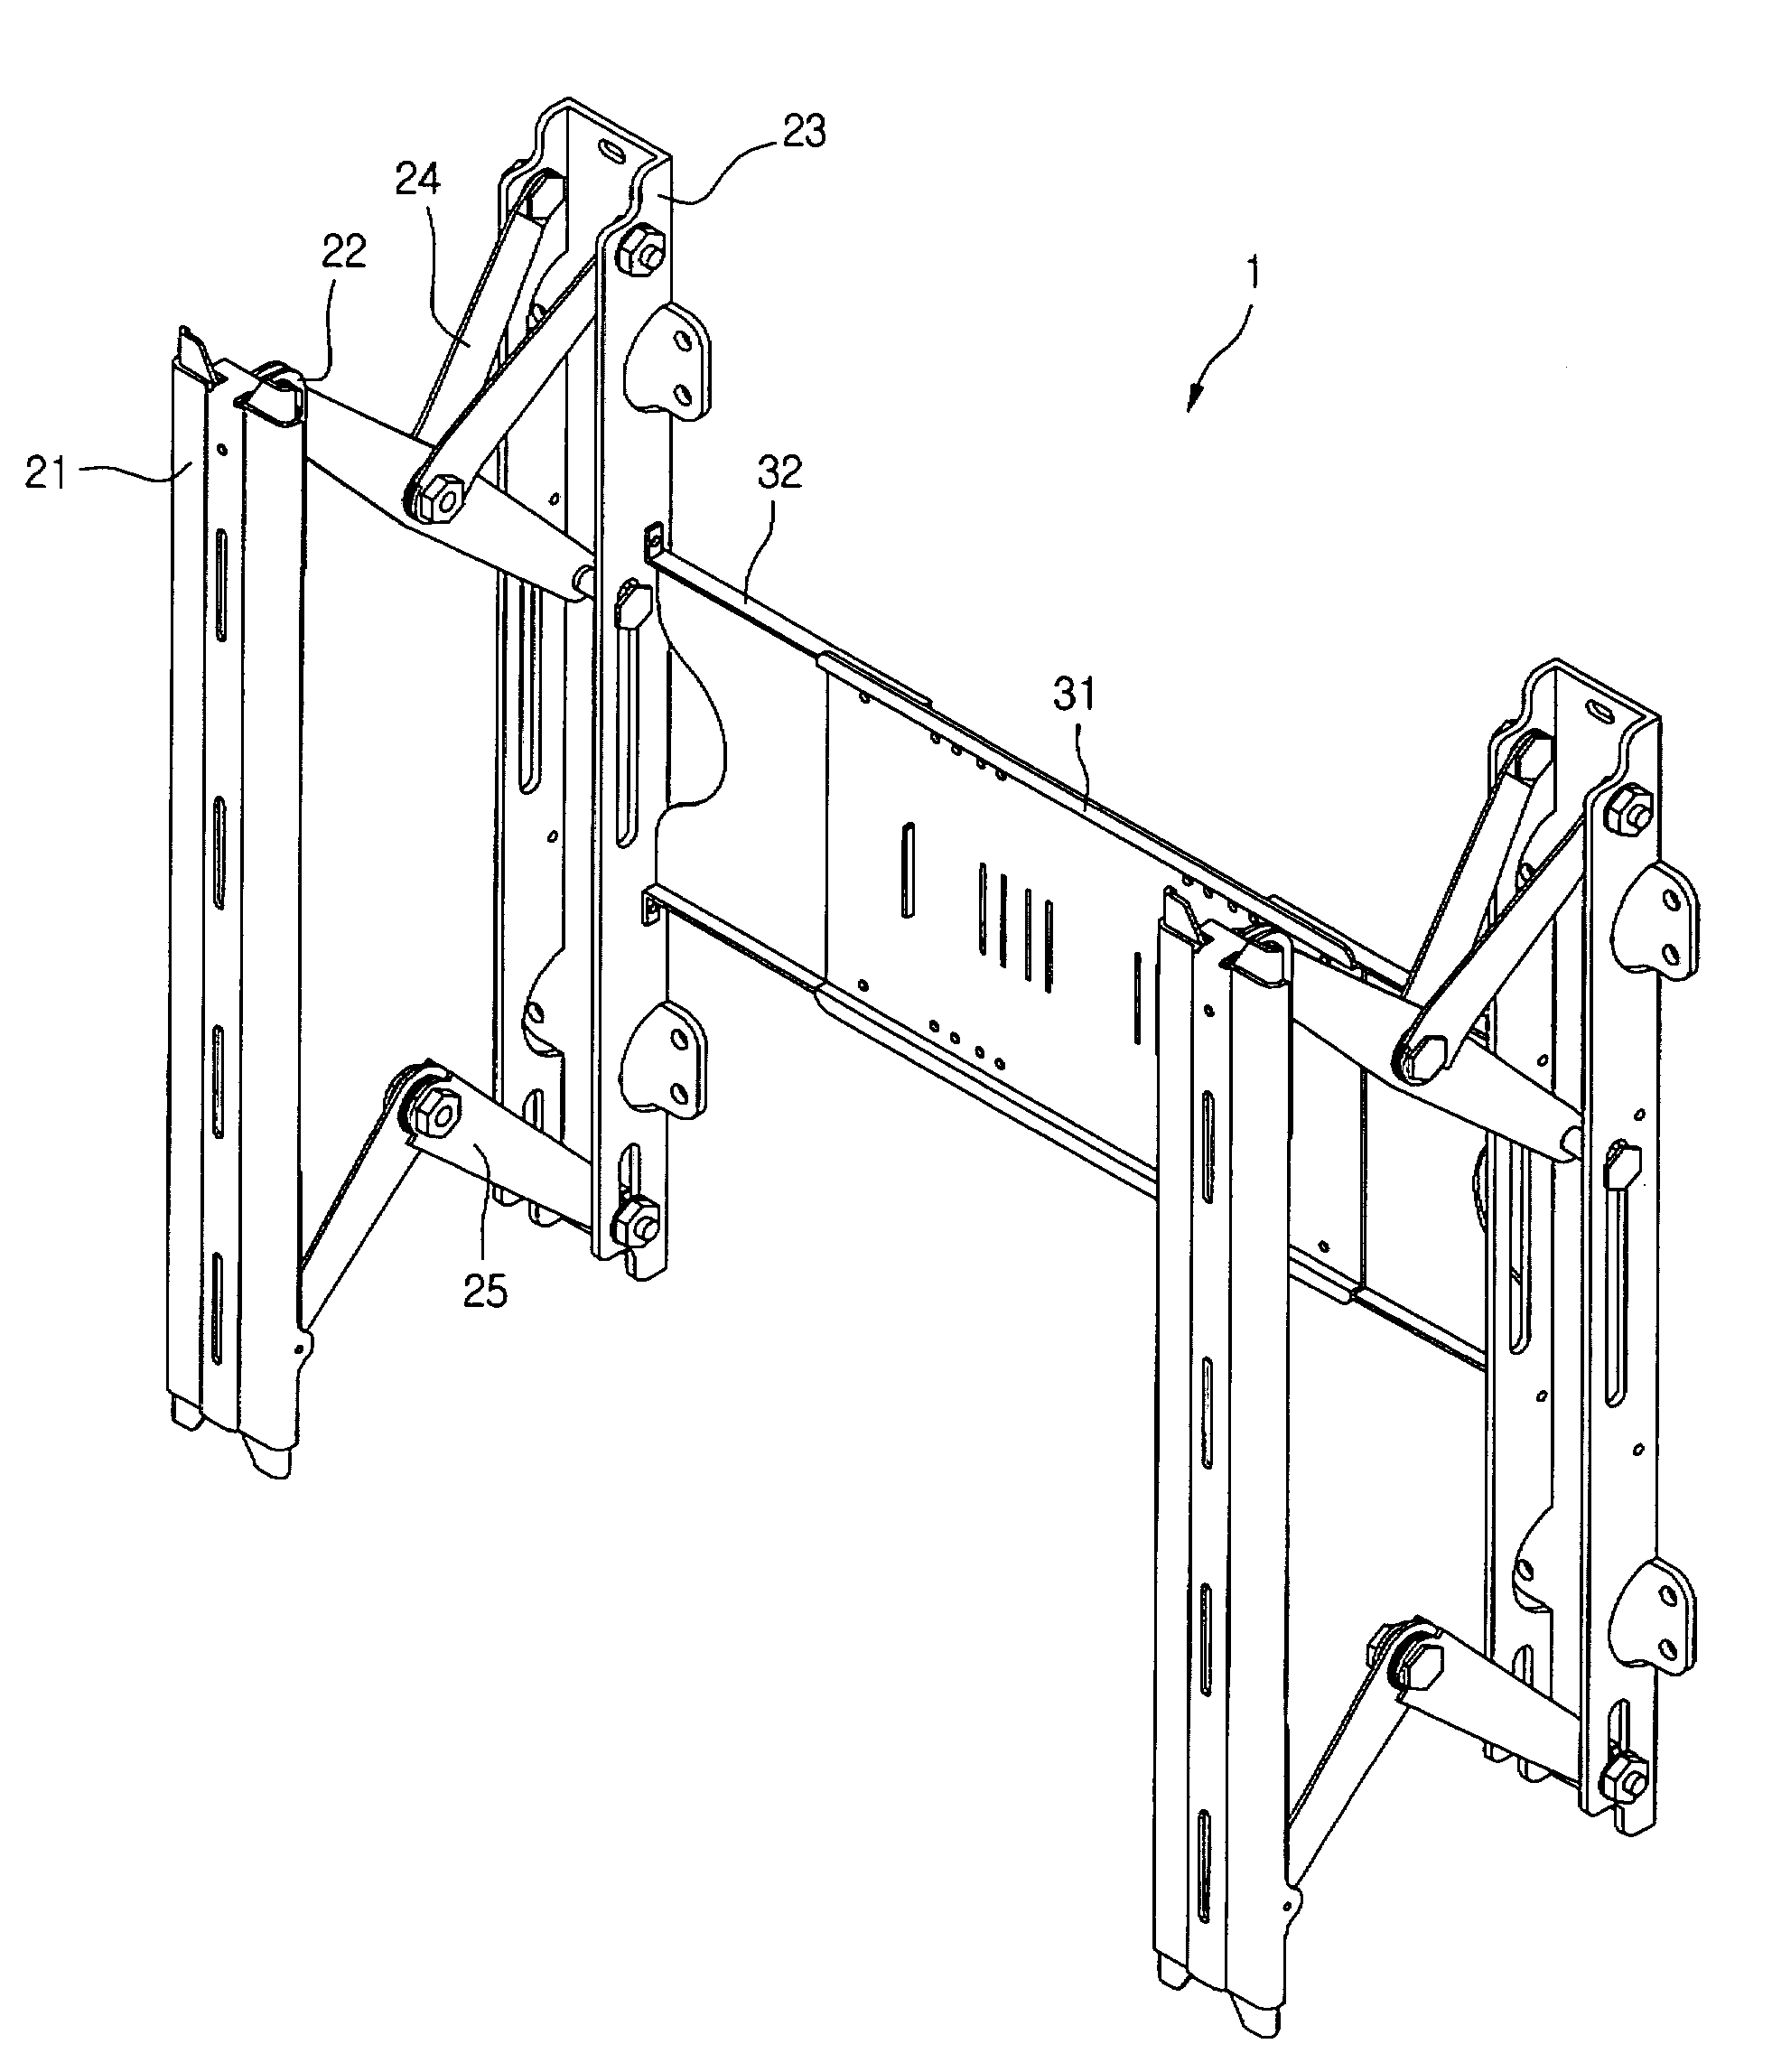 Supporting apparatus for display device